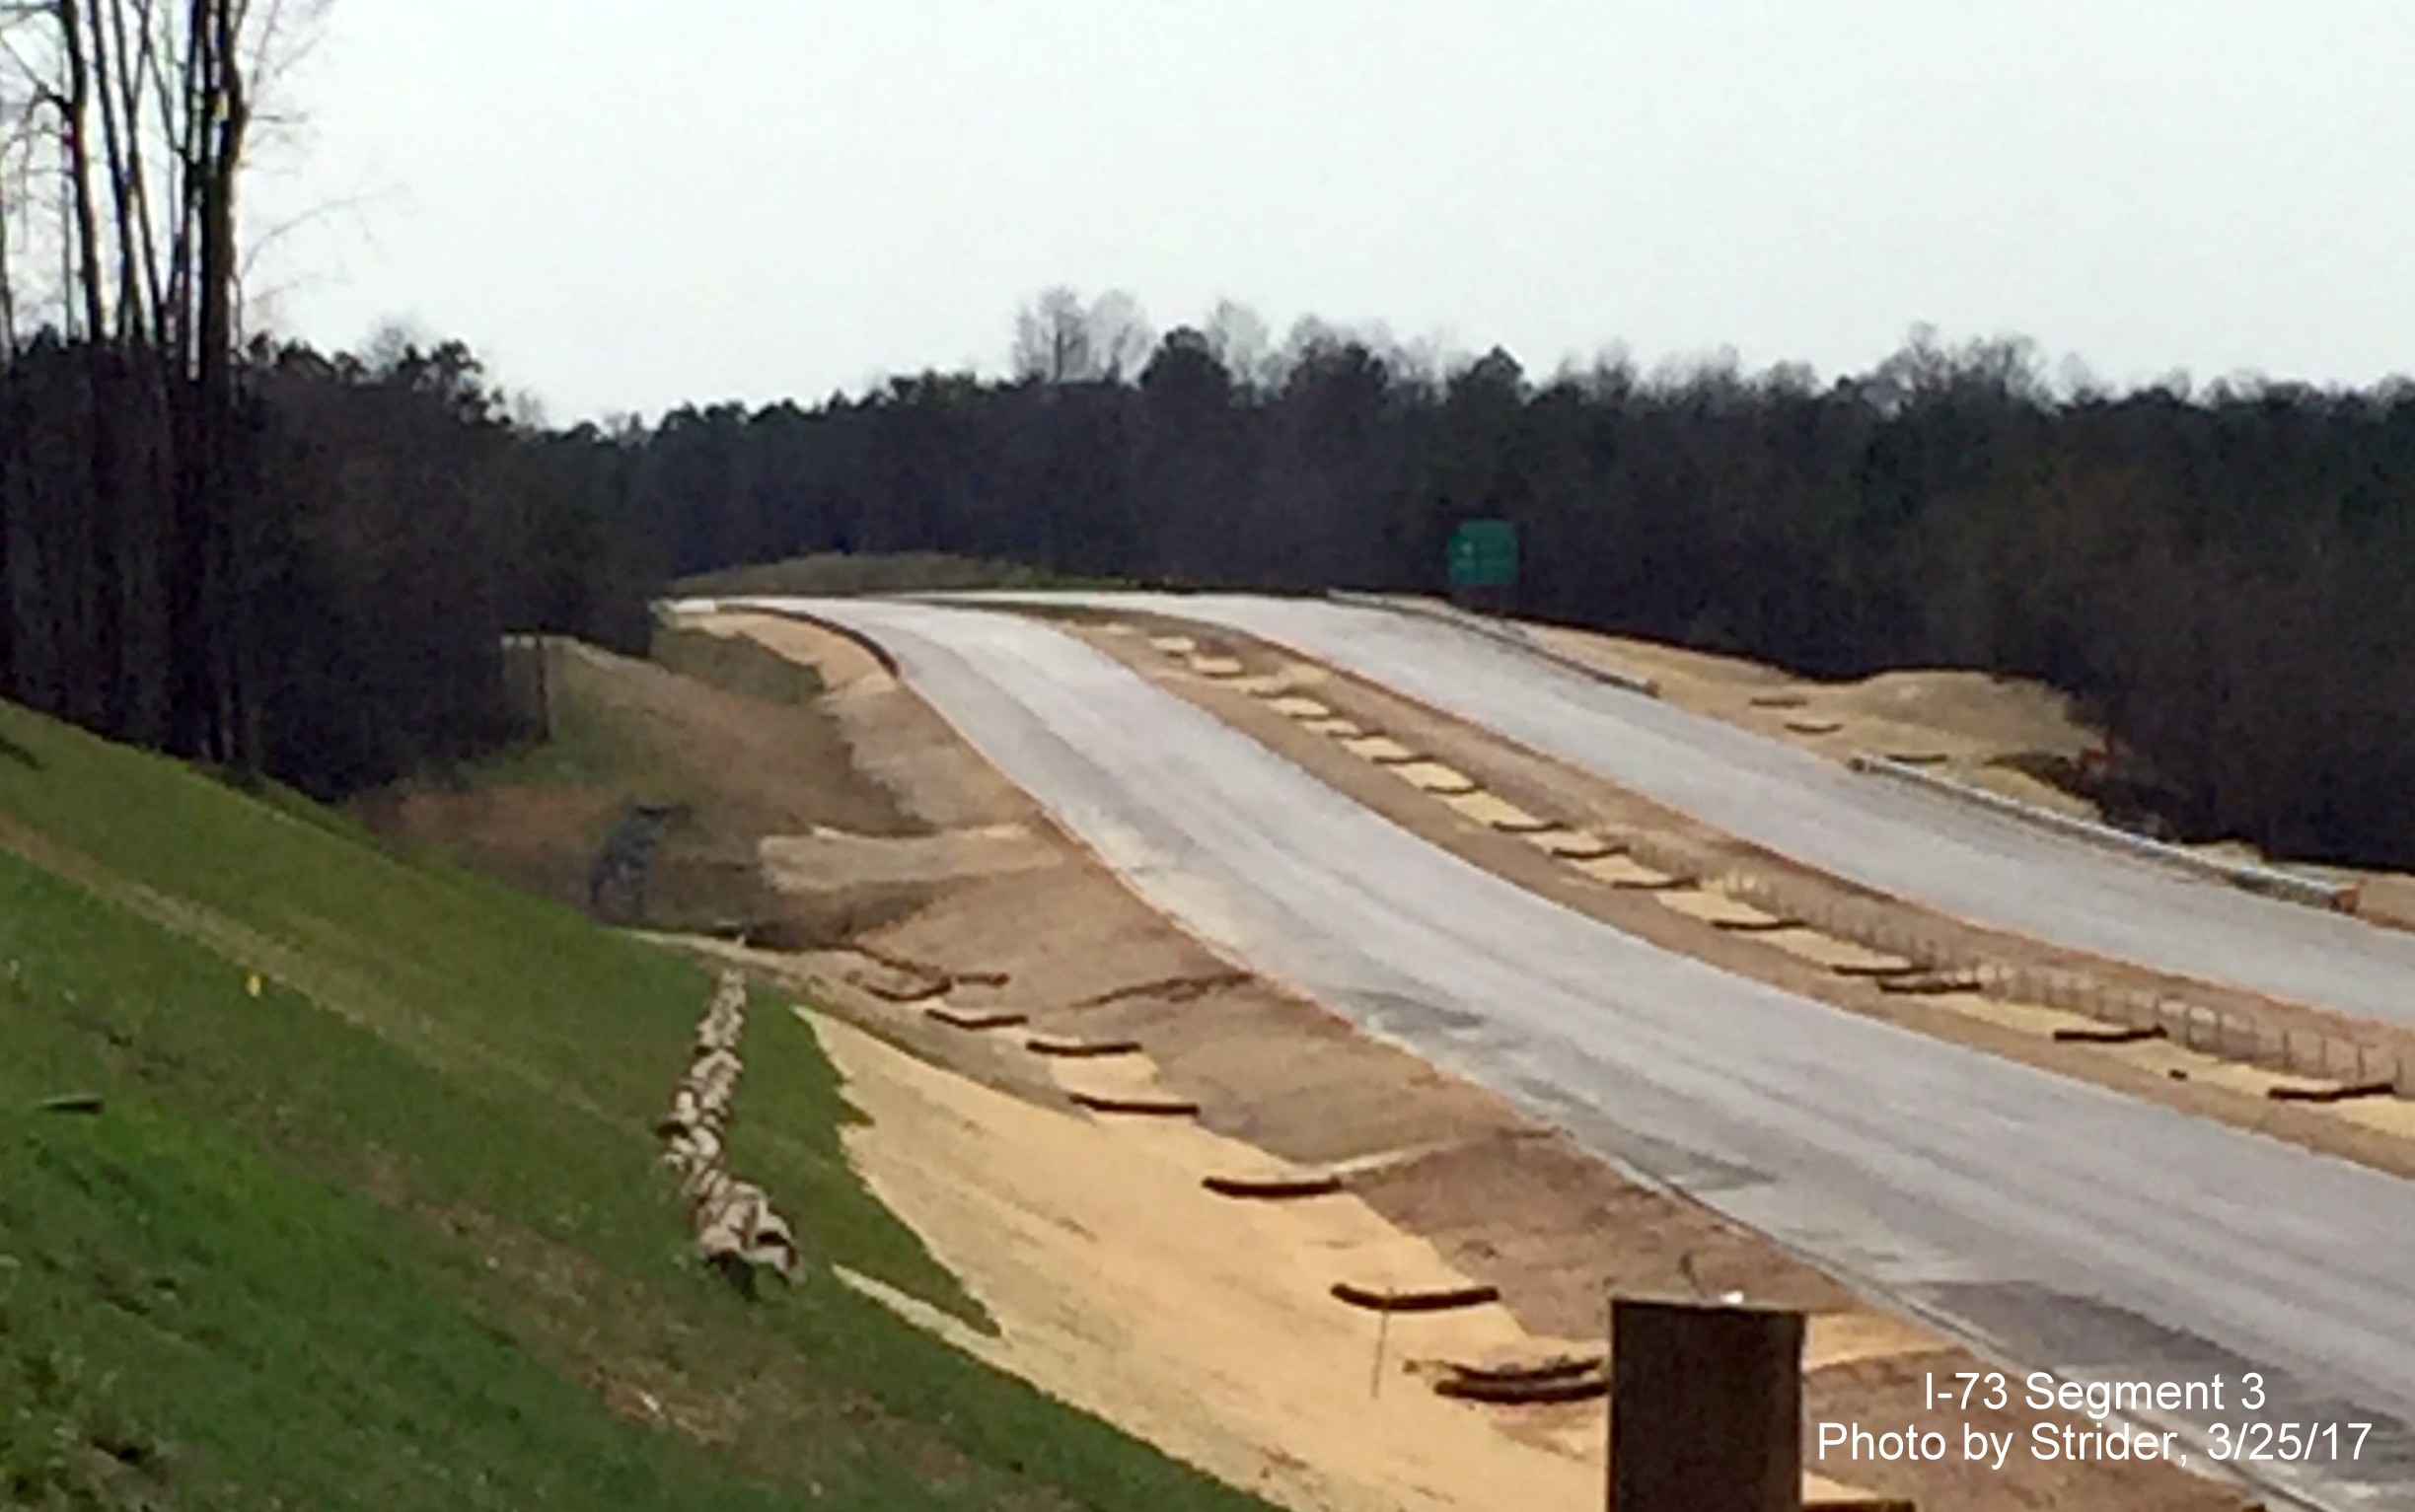 Image of view north from Bunch Rd bridge showing installation of new South US 220 exit sign, photo by Strider